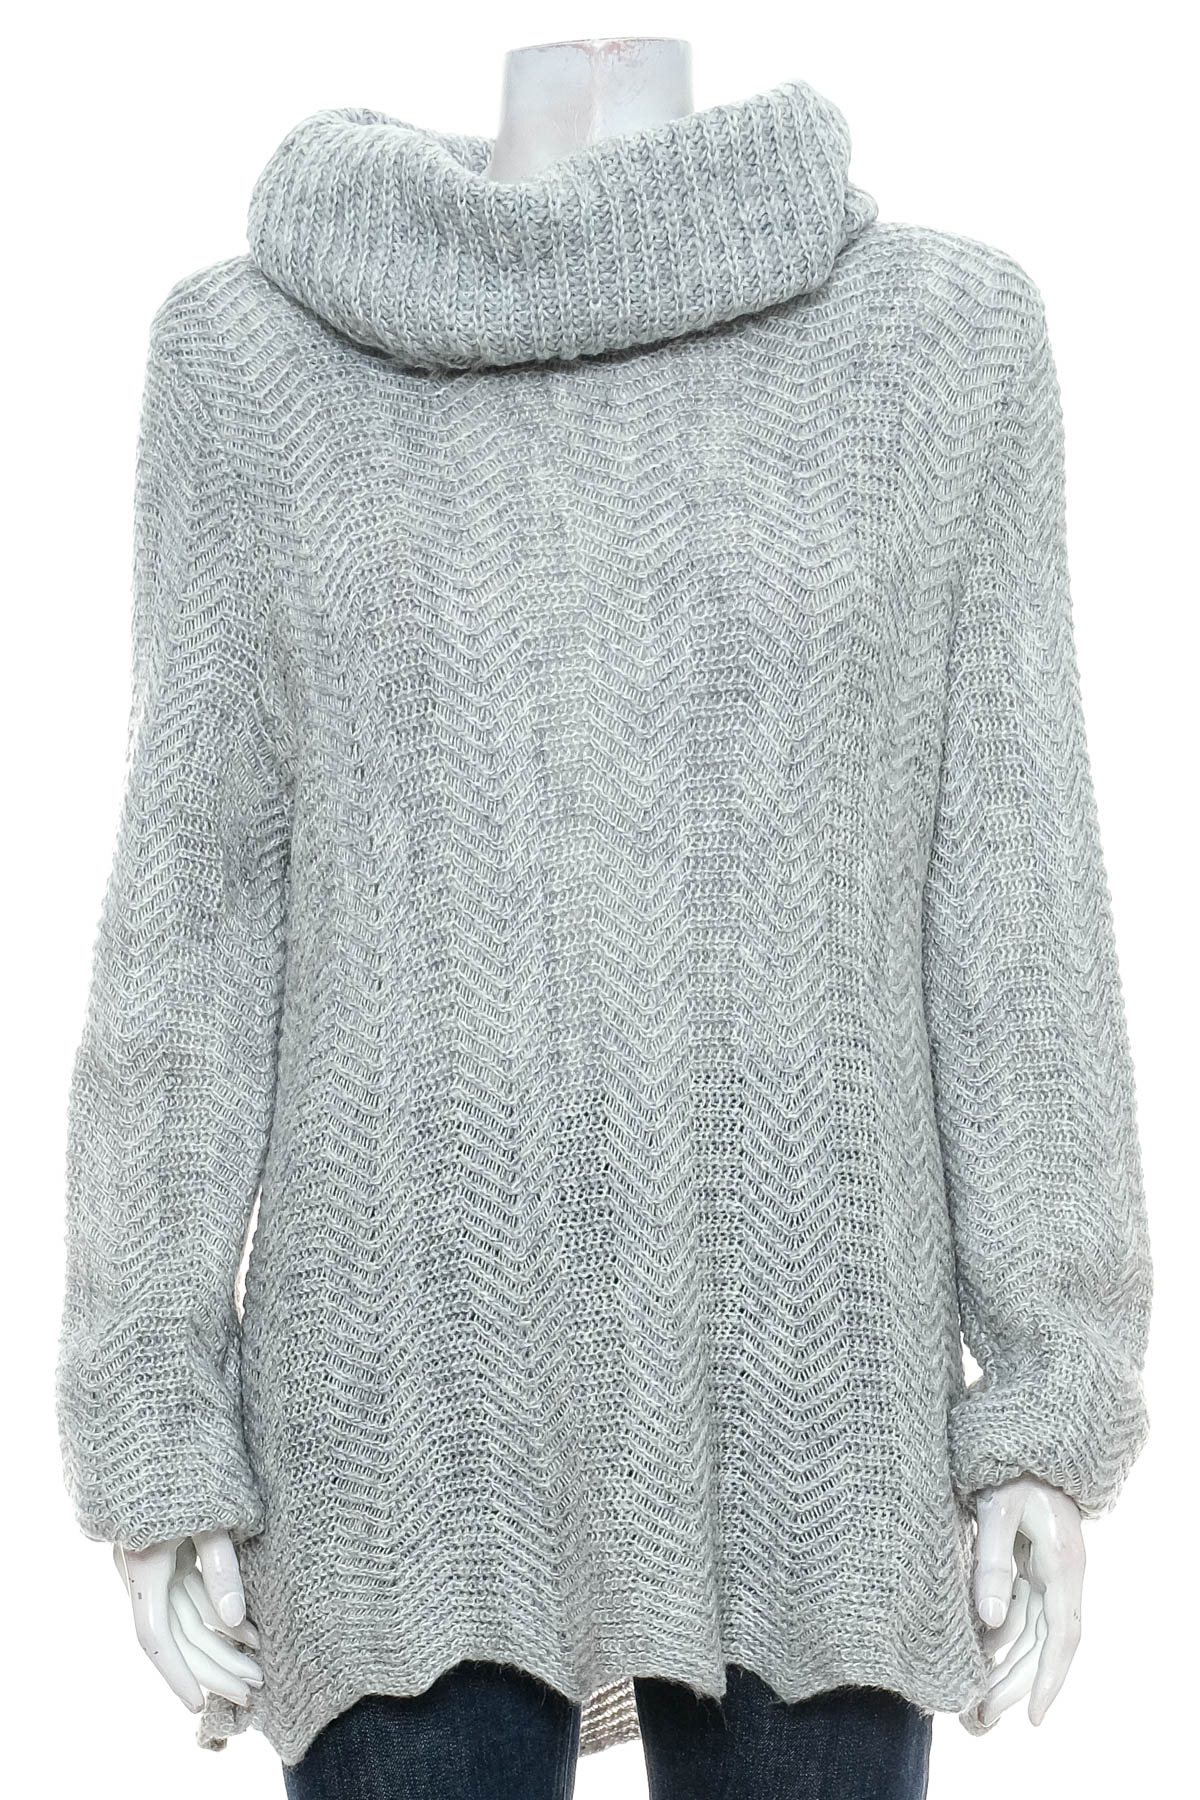 Women's sweater - SELECTION by S.Oliver - 0